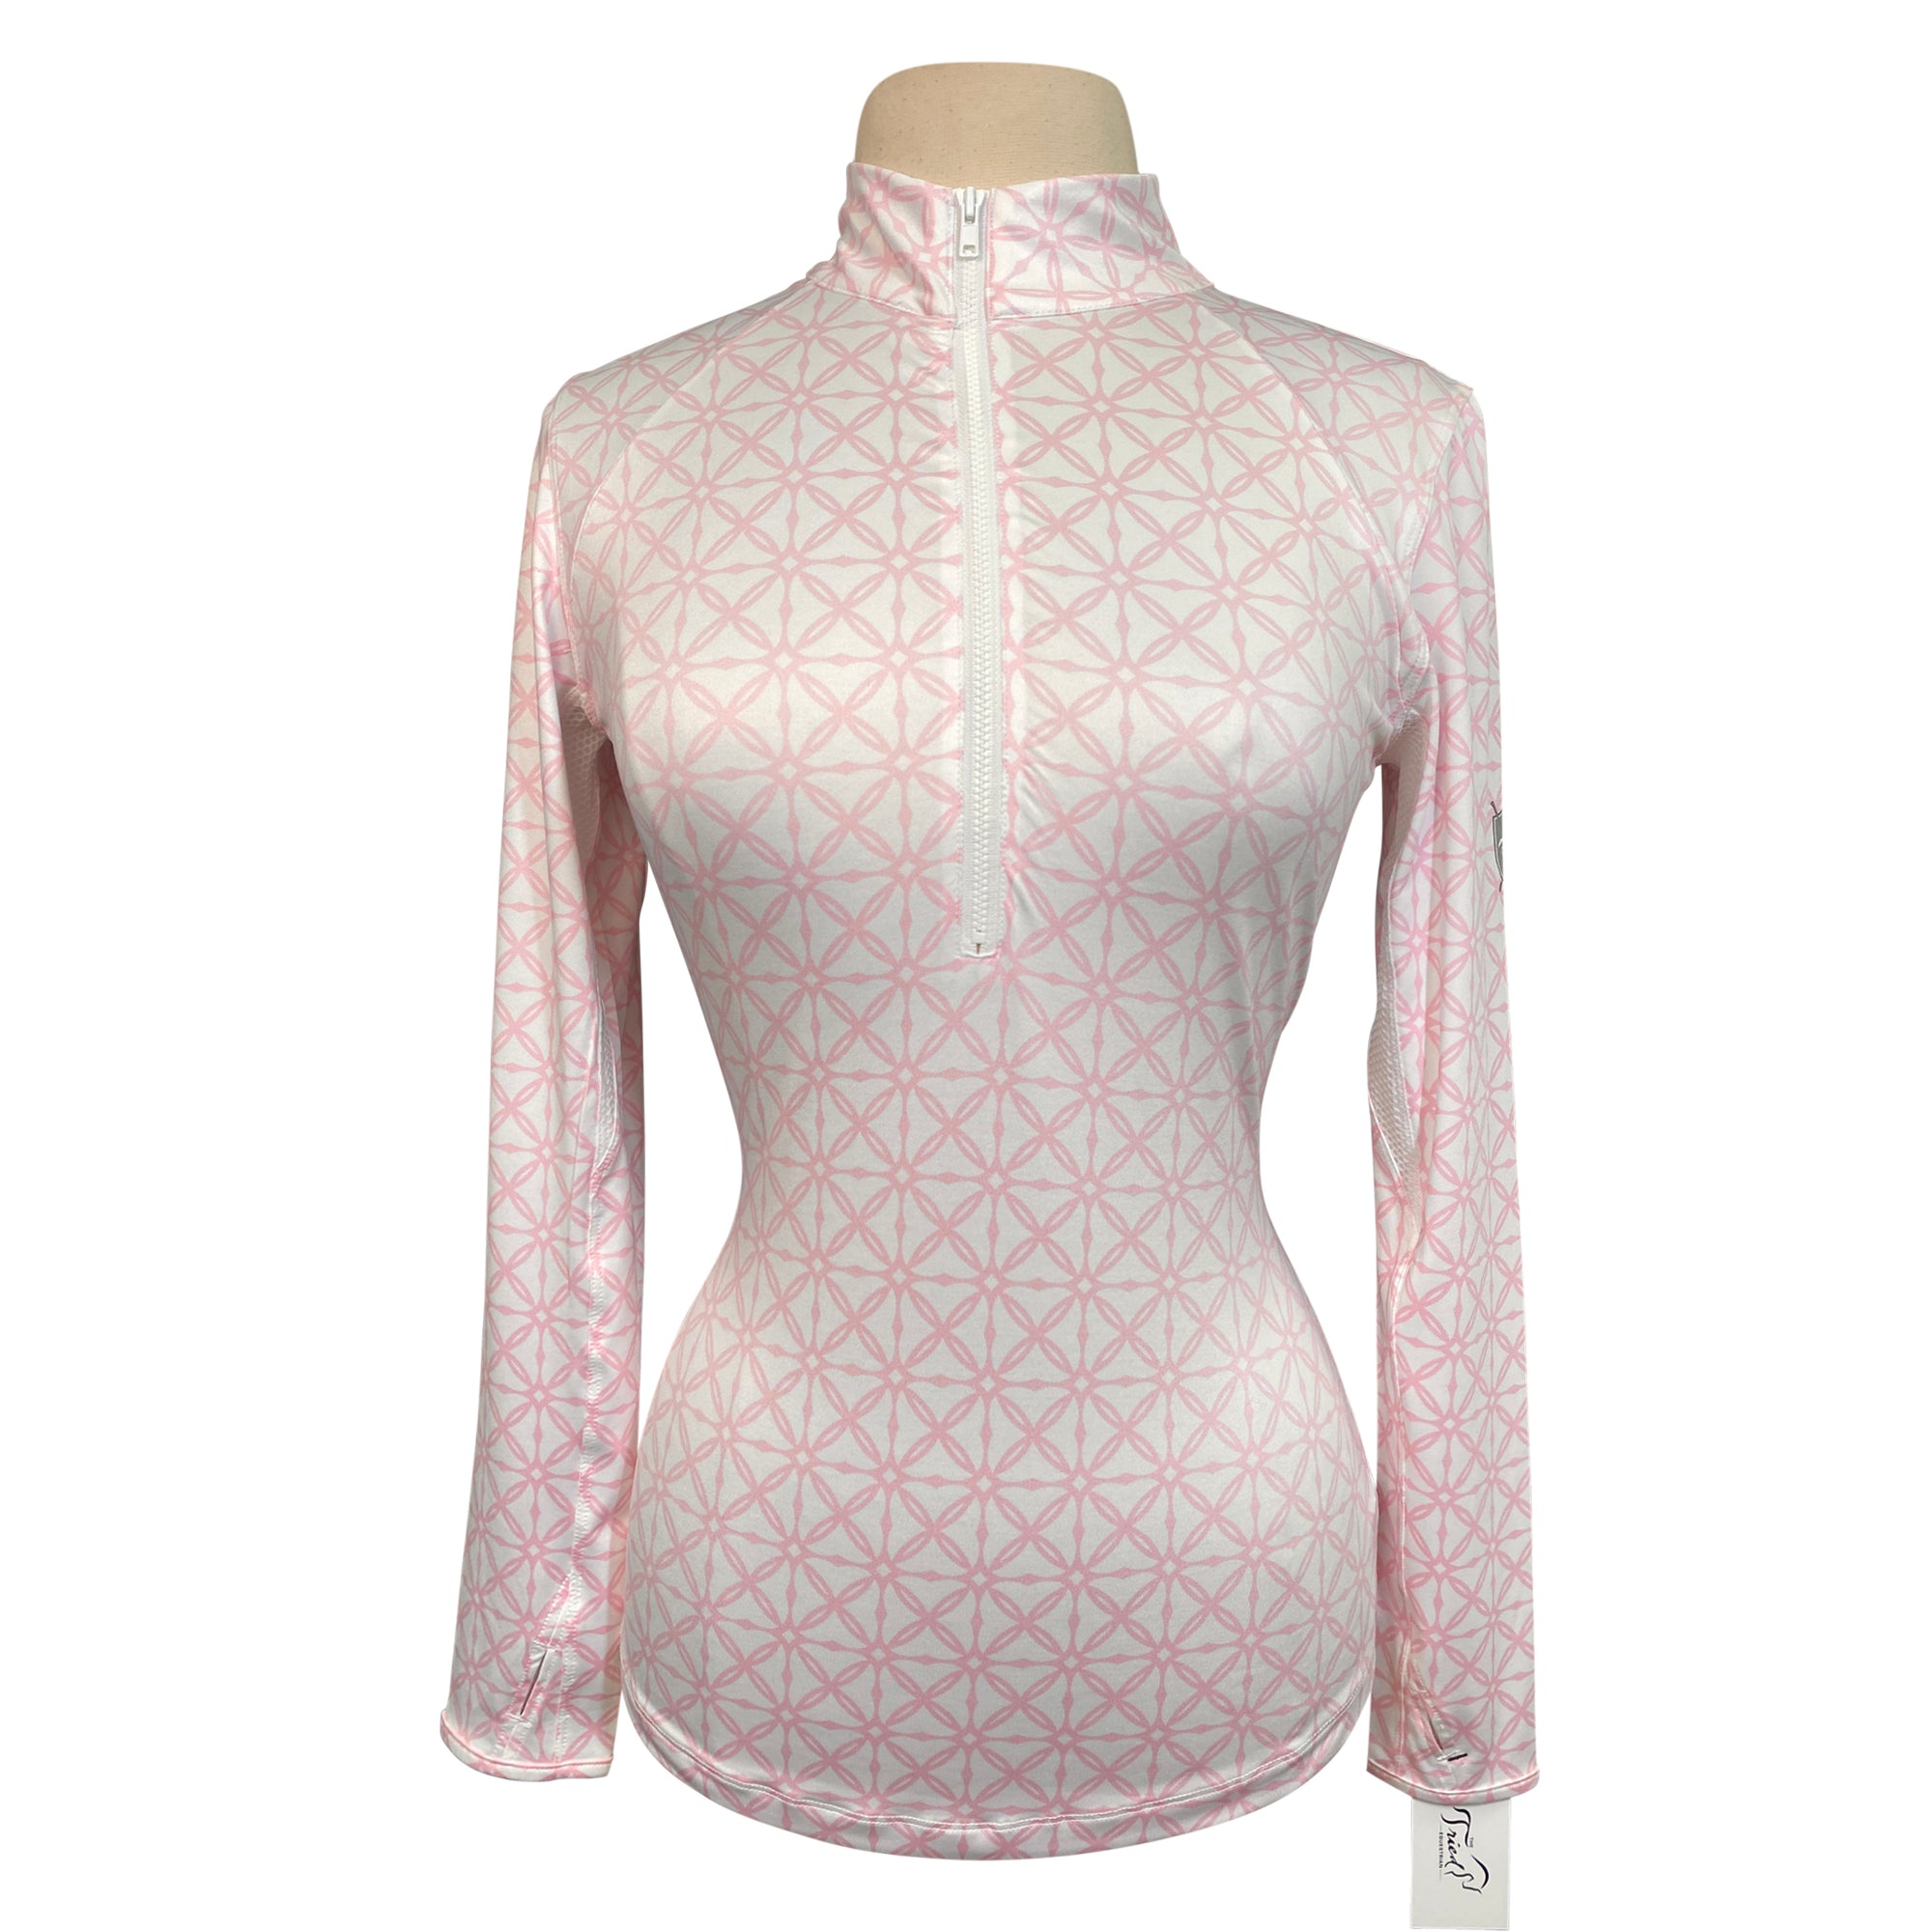 Goode Rider Long Sleeve 1/2 Zip Shirt in Pretty in Pink